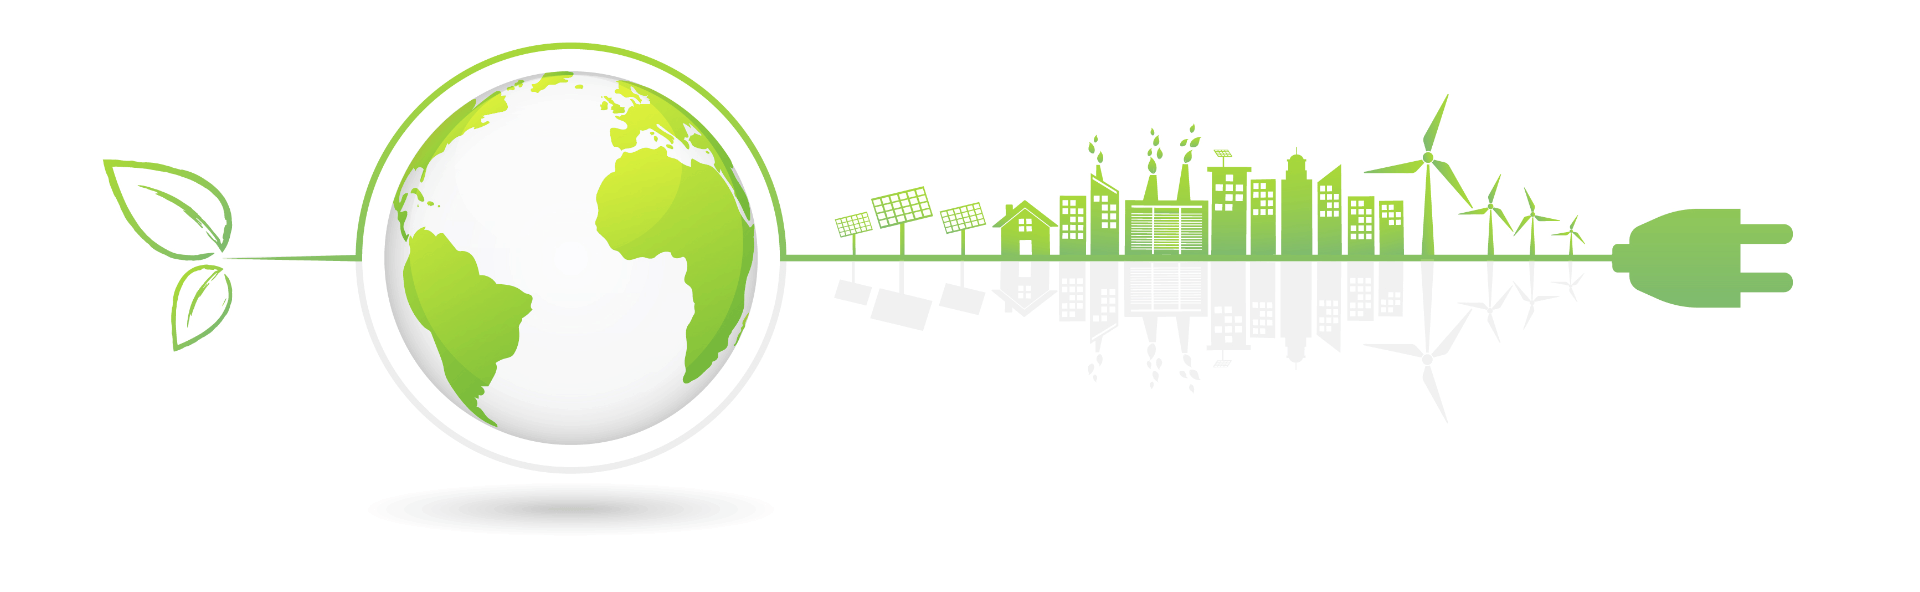 Green sustainable energy symbol with a globe, a cityscape and a plug